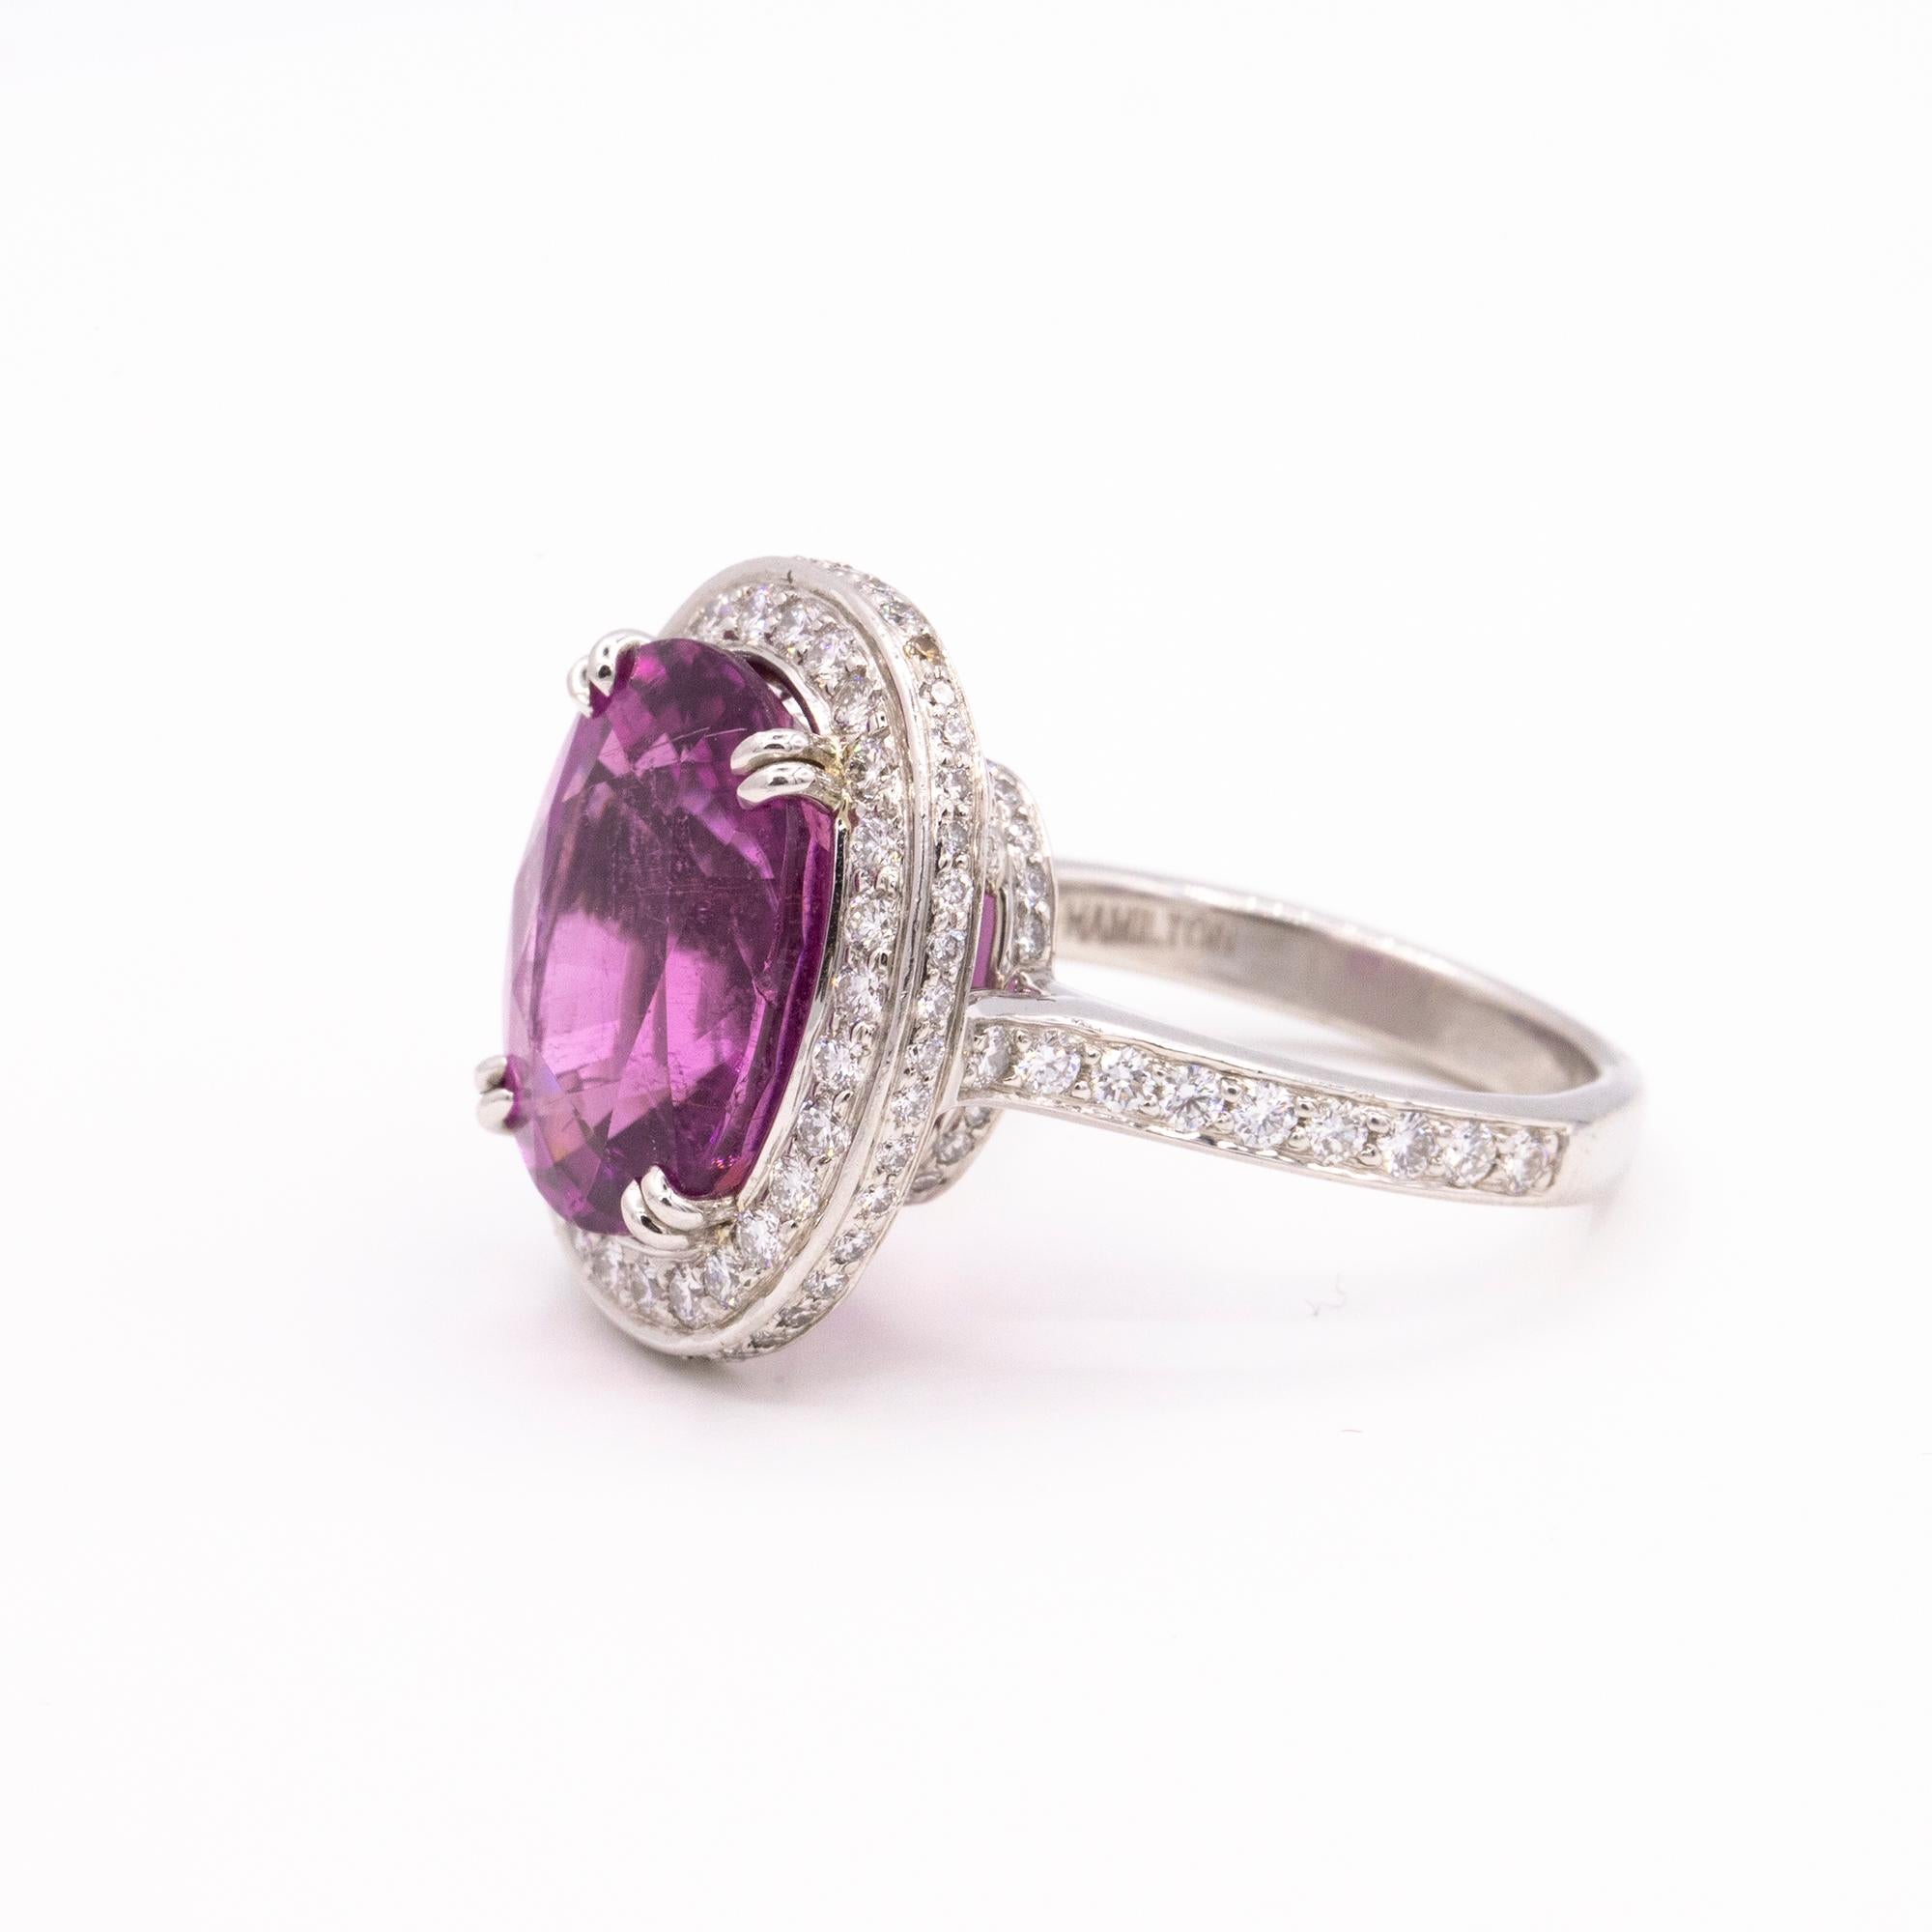 Stunning rare purple-pink oval tourmaline gemstone ring with pave diamond halo and diamond set in the shank. Crafted in platinum.

Tourmaline is the most colorful of all gemstones. It occurs in all colors, but pink, red, green, blue and